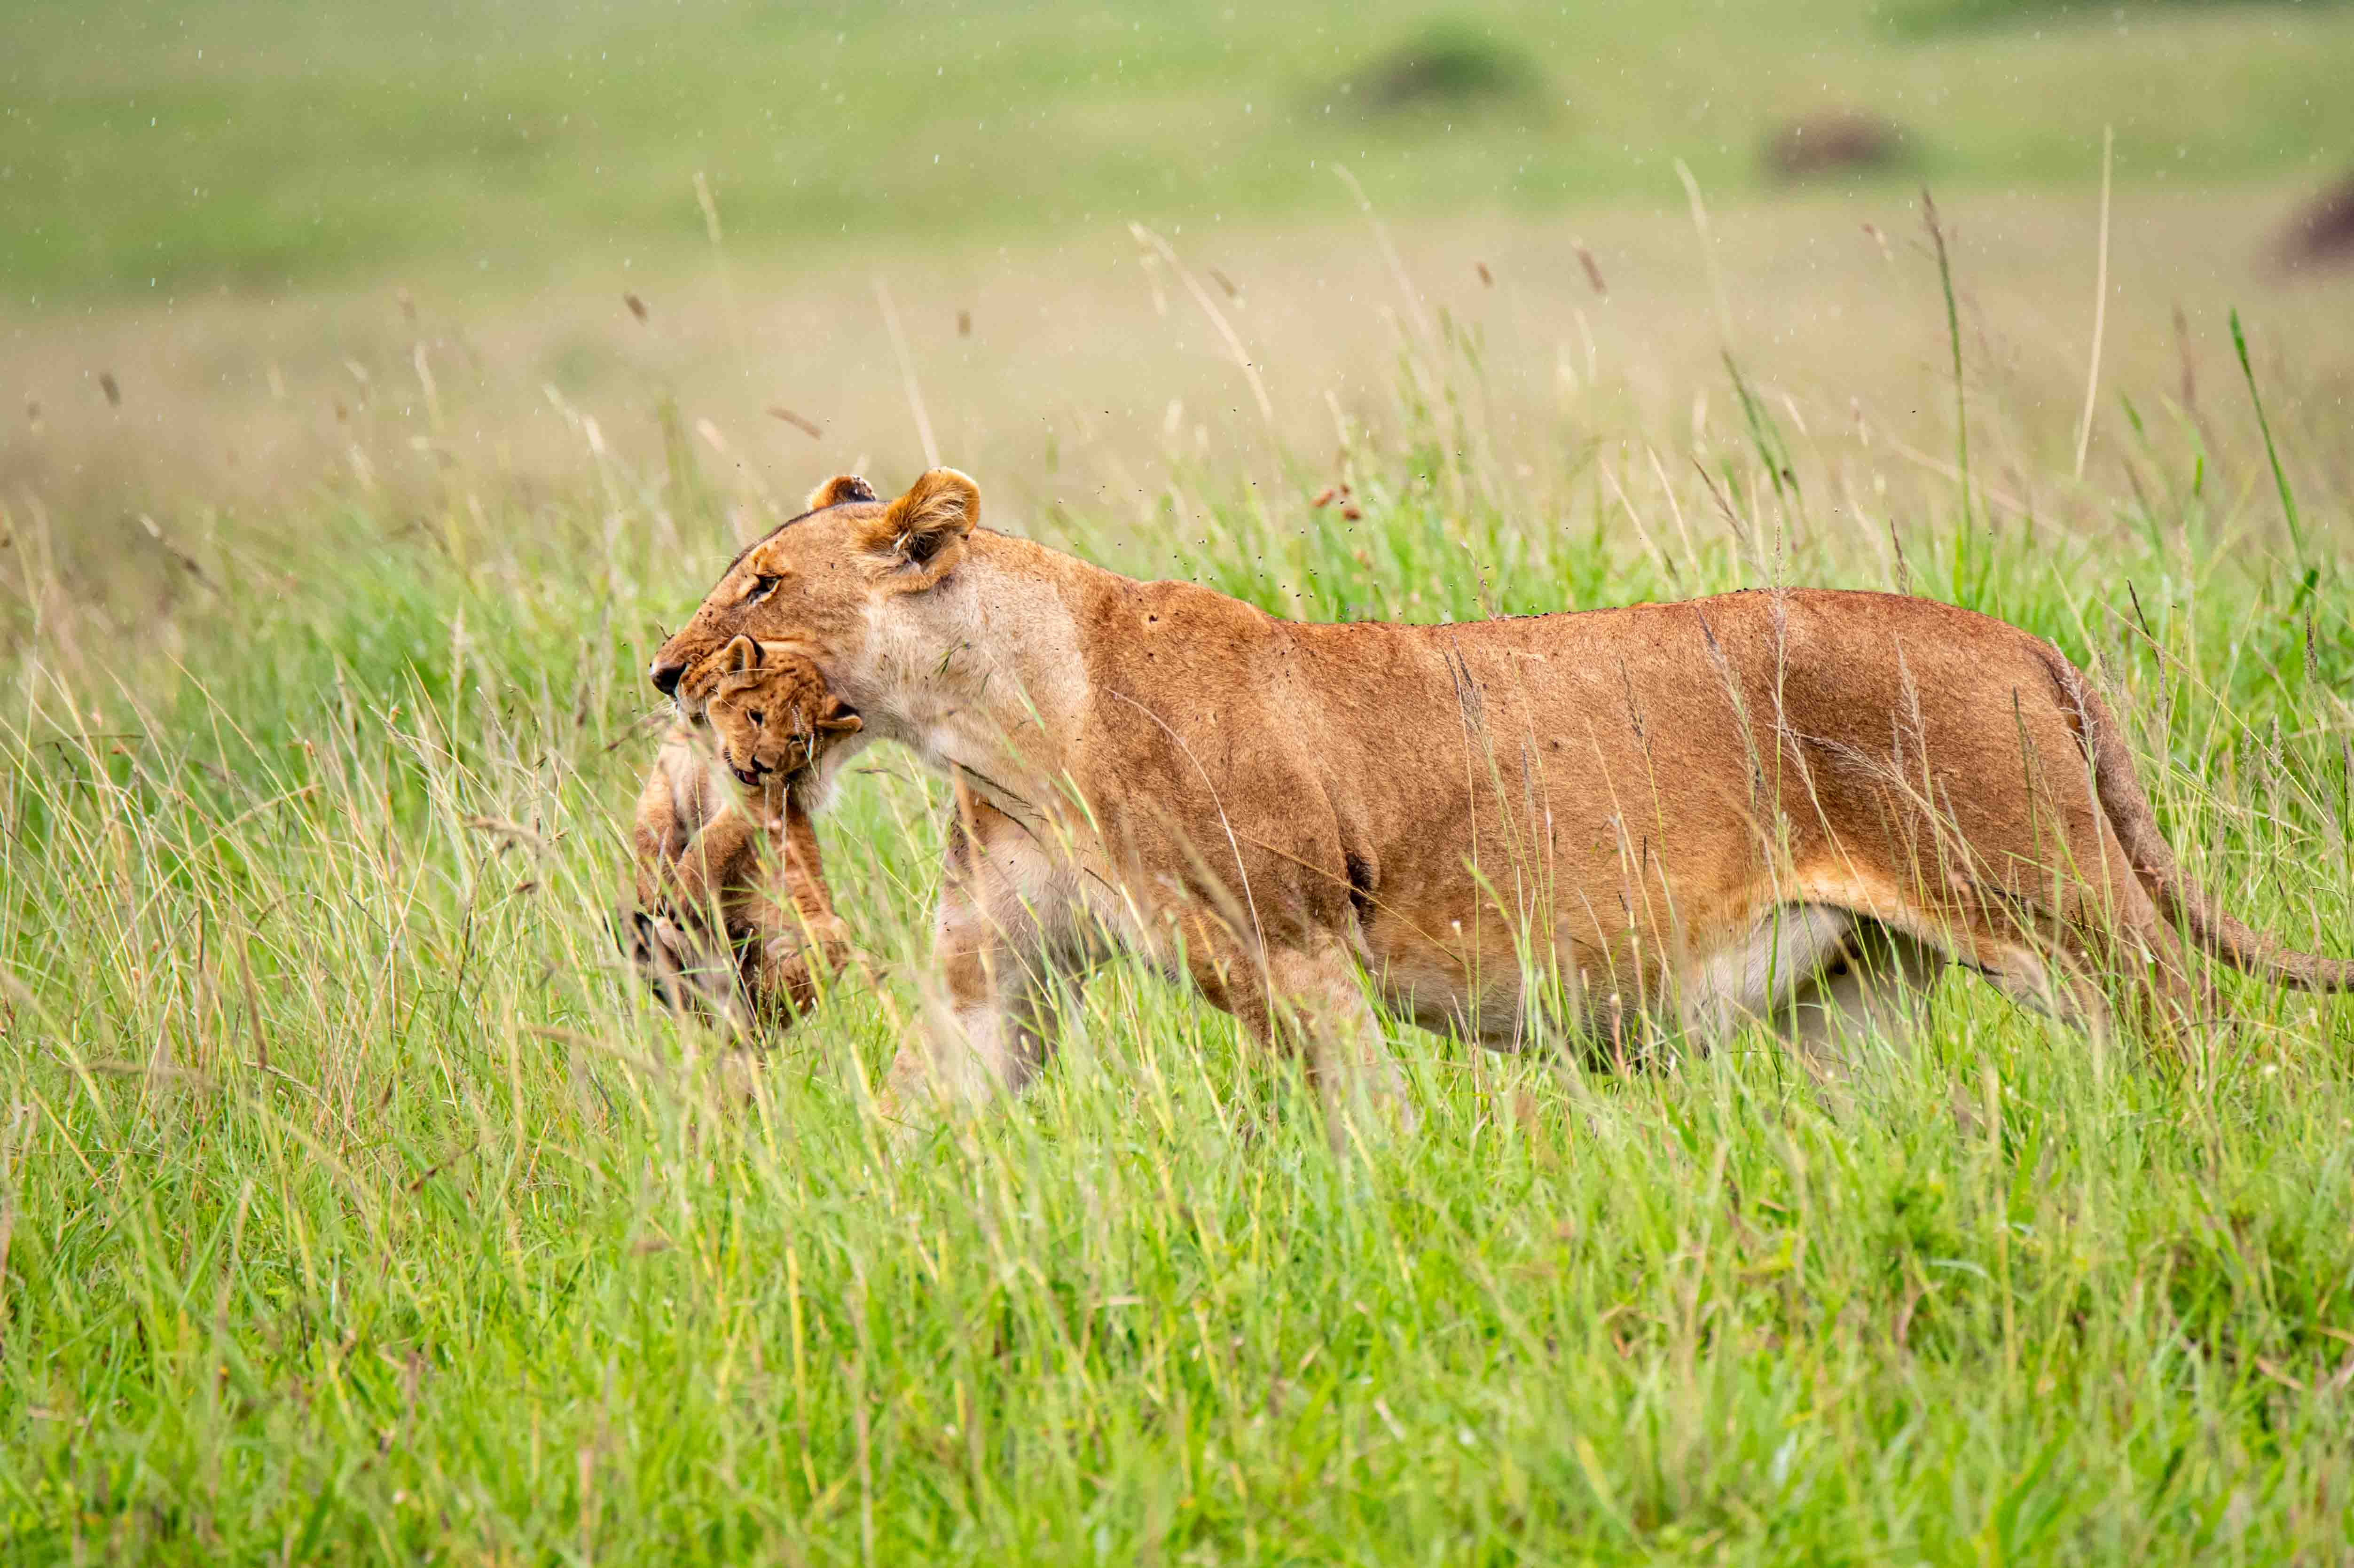 Above: A lioness cradles one of her cubs in her jaws 